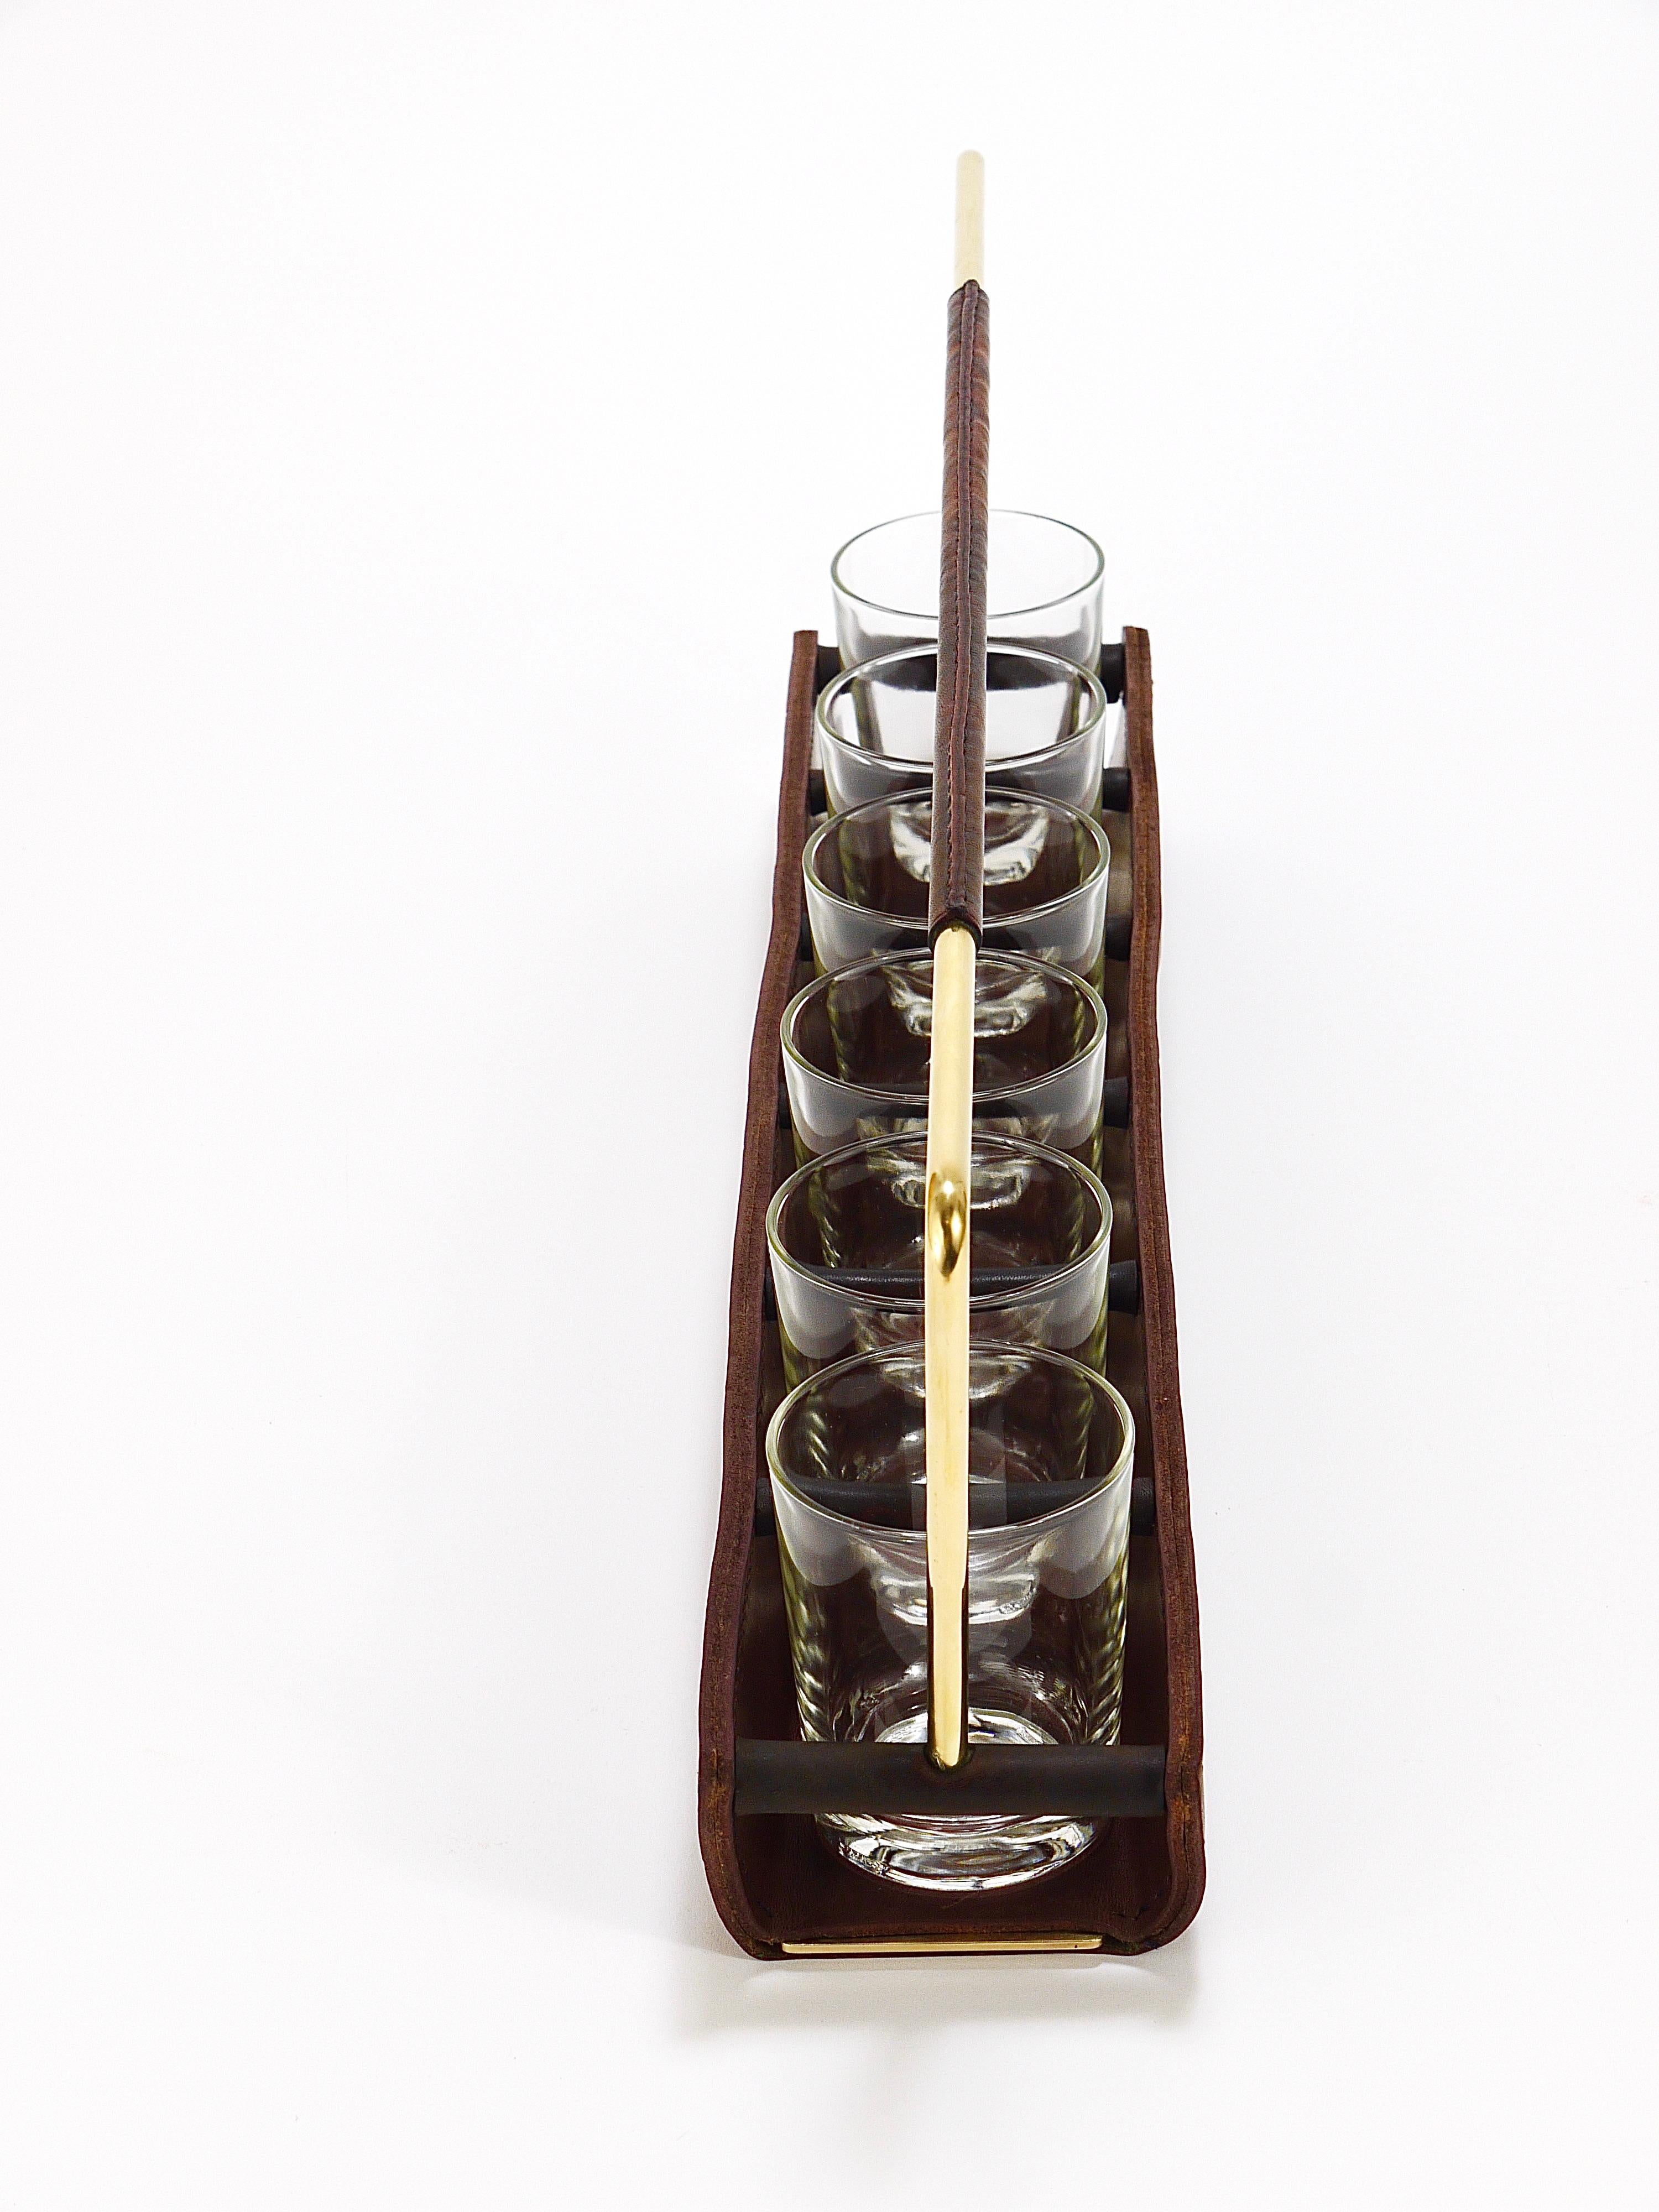 Carl Auböck II Drinking Glass Carrying Rack, Leather & Brass, Austria 1950s For Sale 12